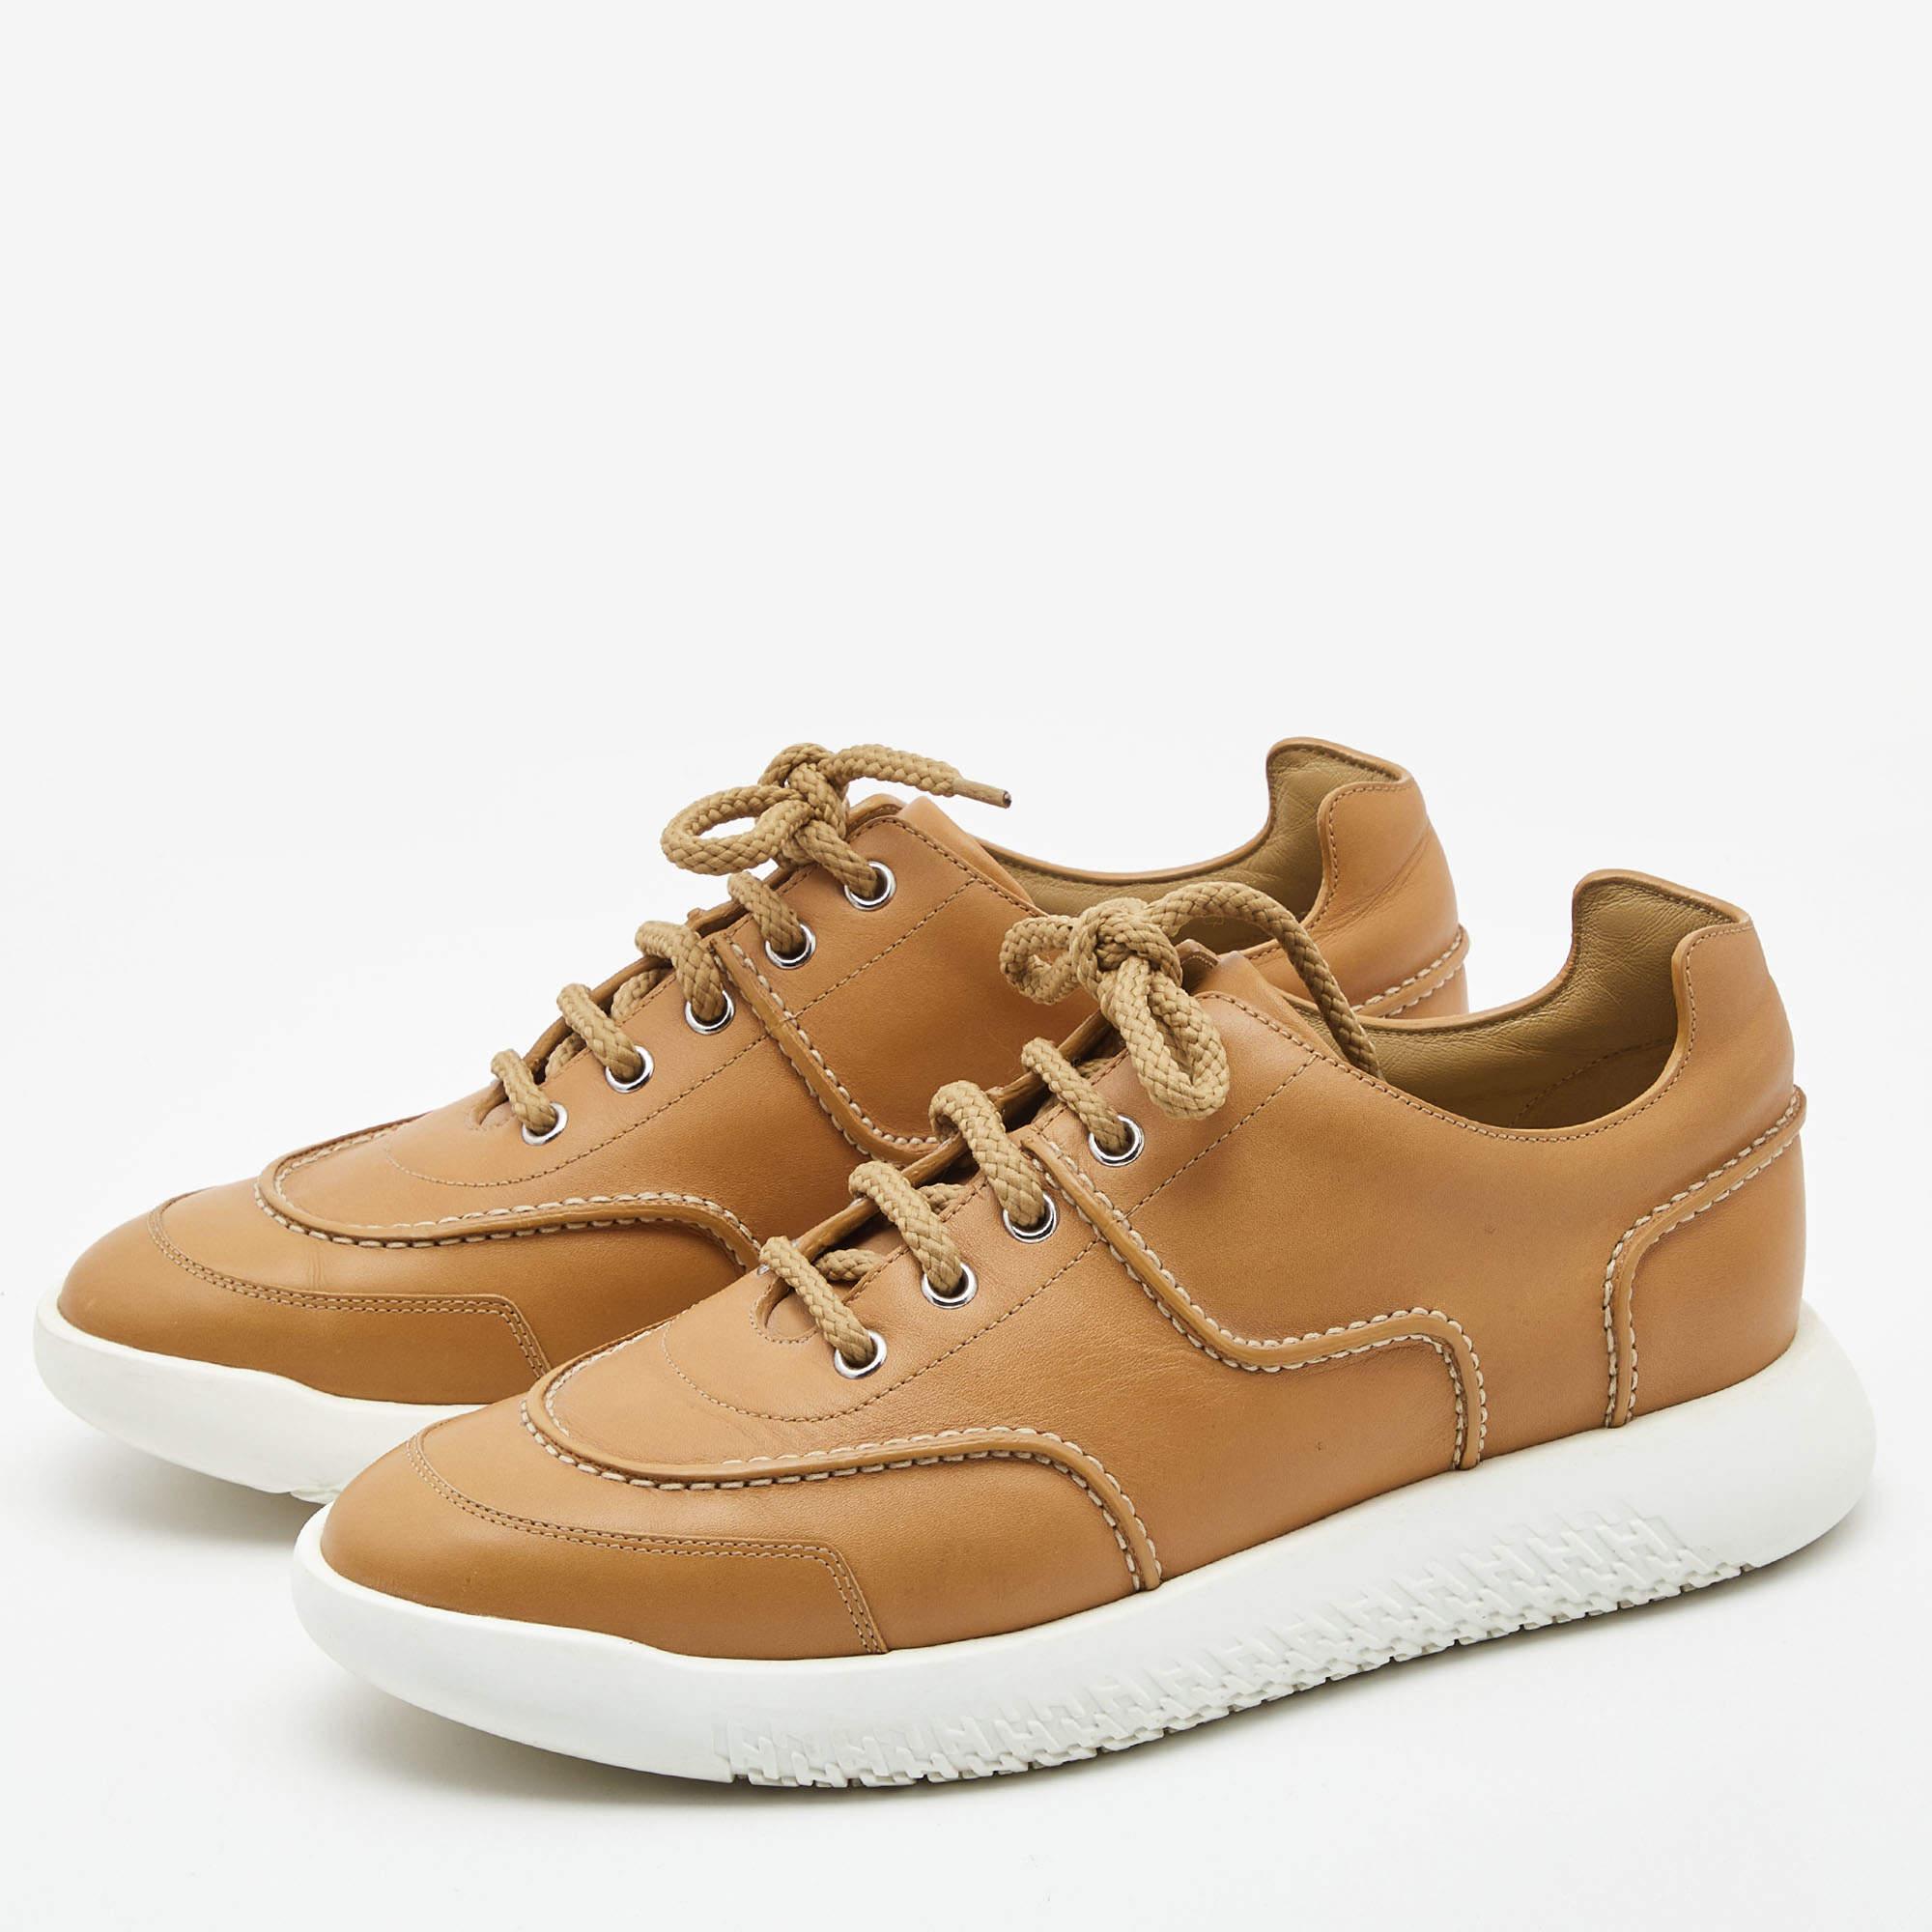 Give your outfit a luxe update with this pair of Hermes sneakers. The shoes are sewn perfectly to help you make a statement in them for a long time.

Includes
Original Dustbag